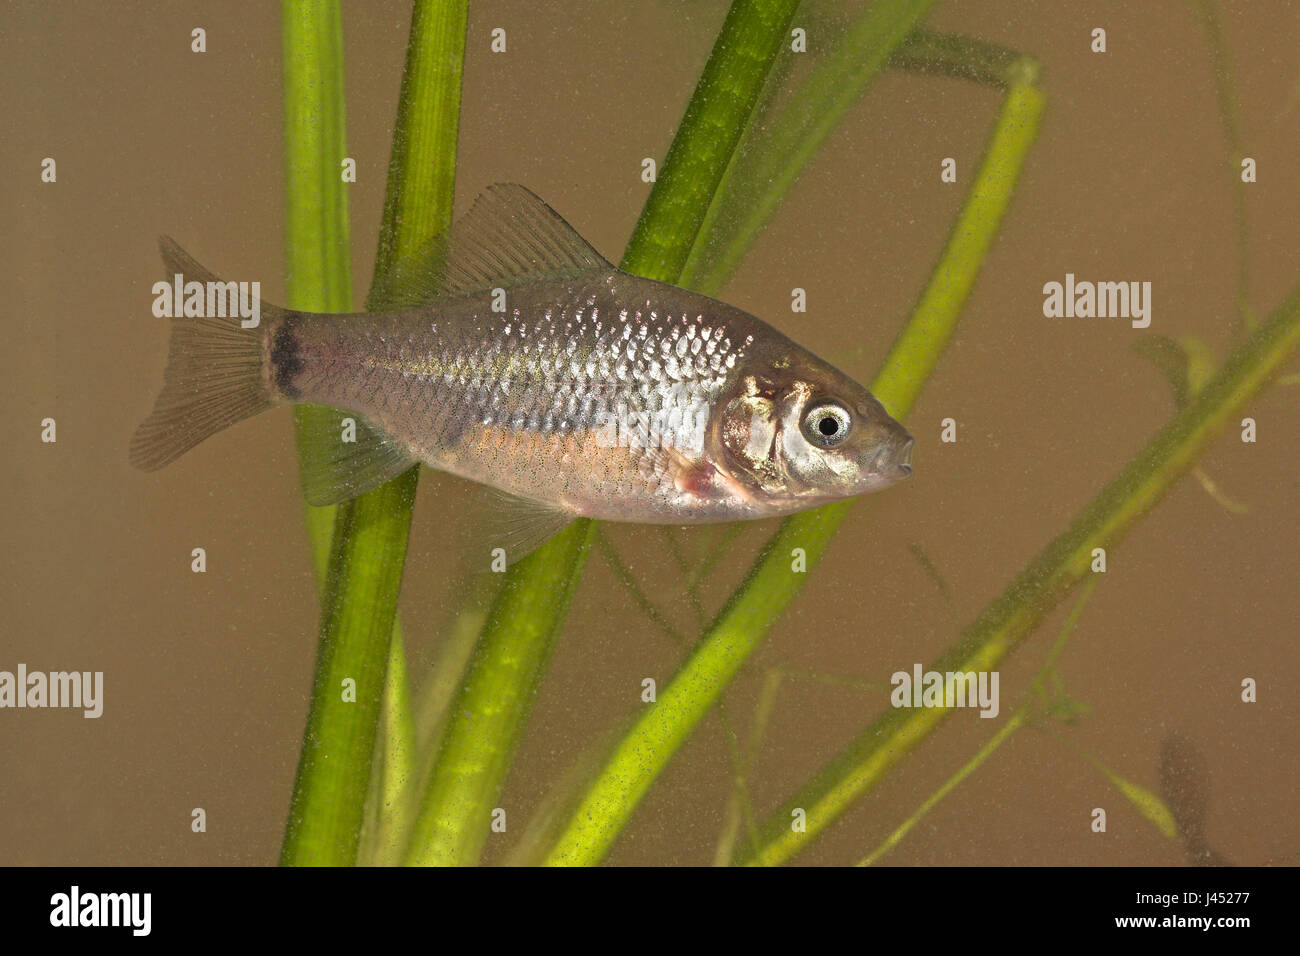 photo of a juvenile Crucian carp with the characteristic black spot on the tail well visible. Stock Photo